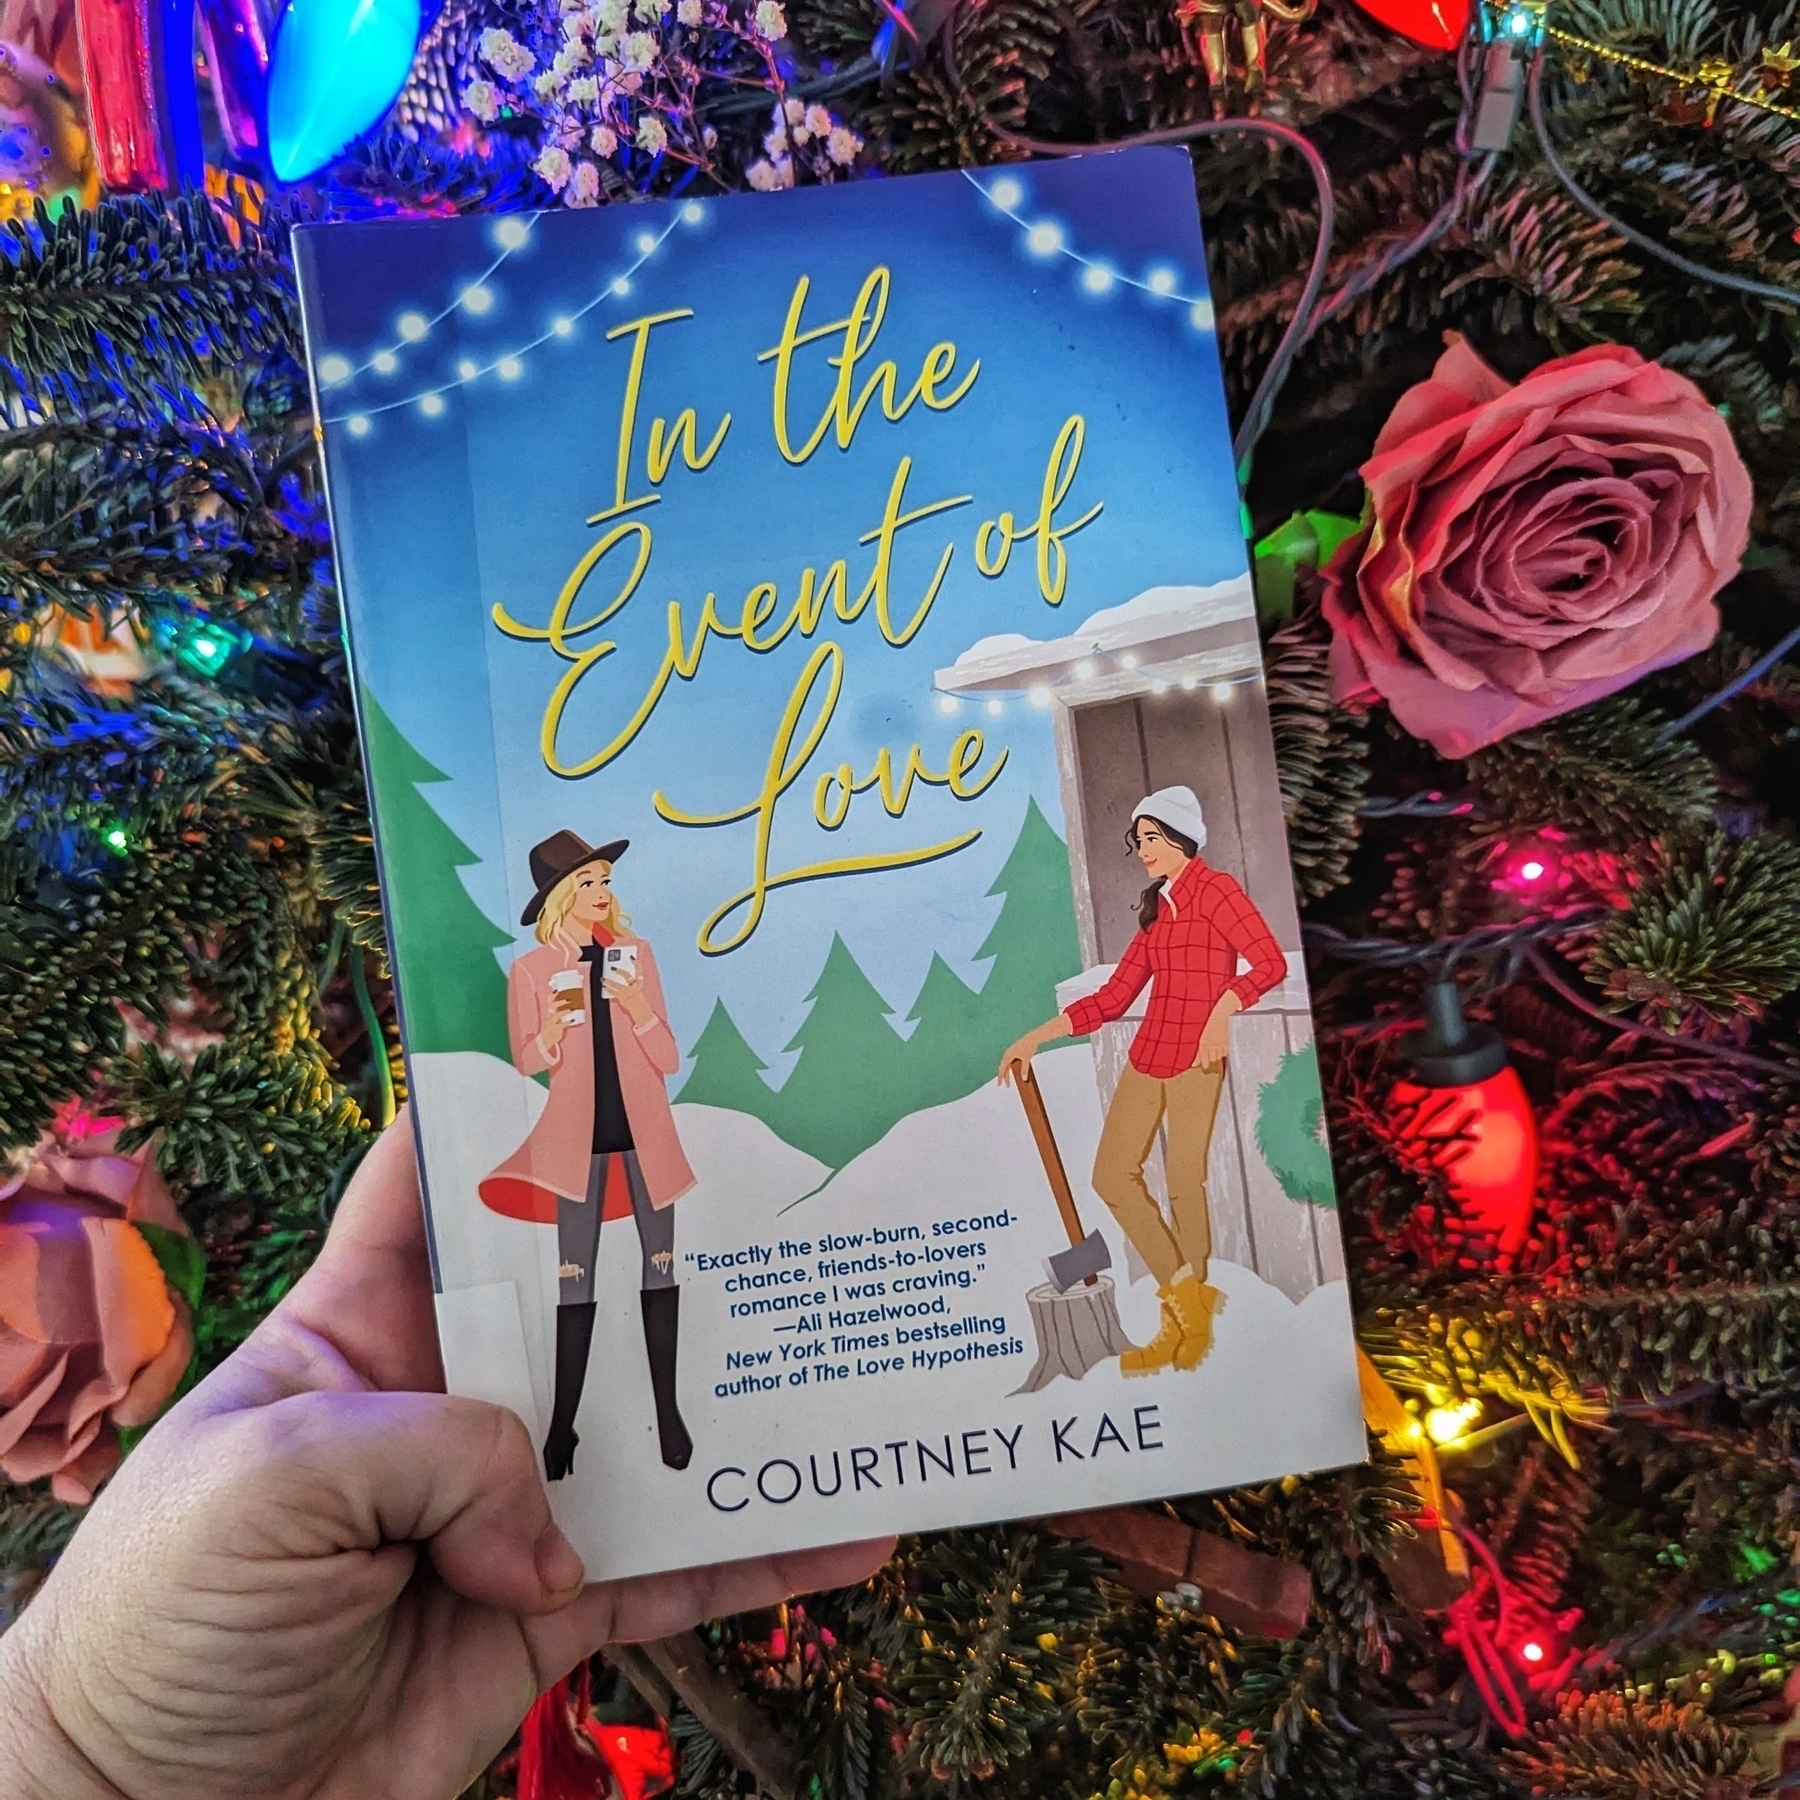 A hand holding a book titled “In the Event of Love” by Courtney Kae in front of a colorful Christmas tree, with a rose and lights visible in the background. The book is a romantic novel set in a winter wonderland.